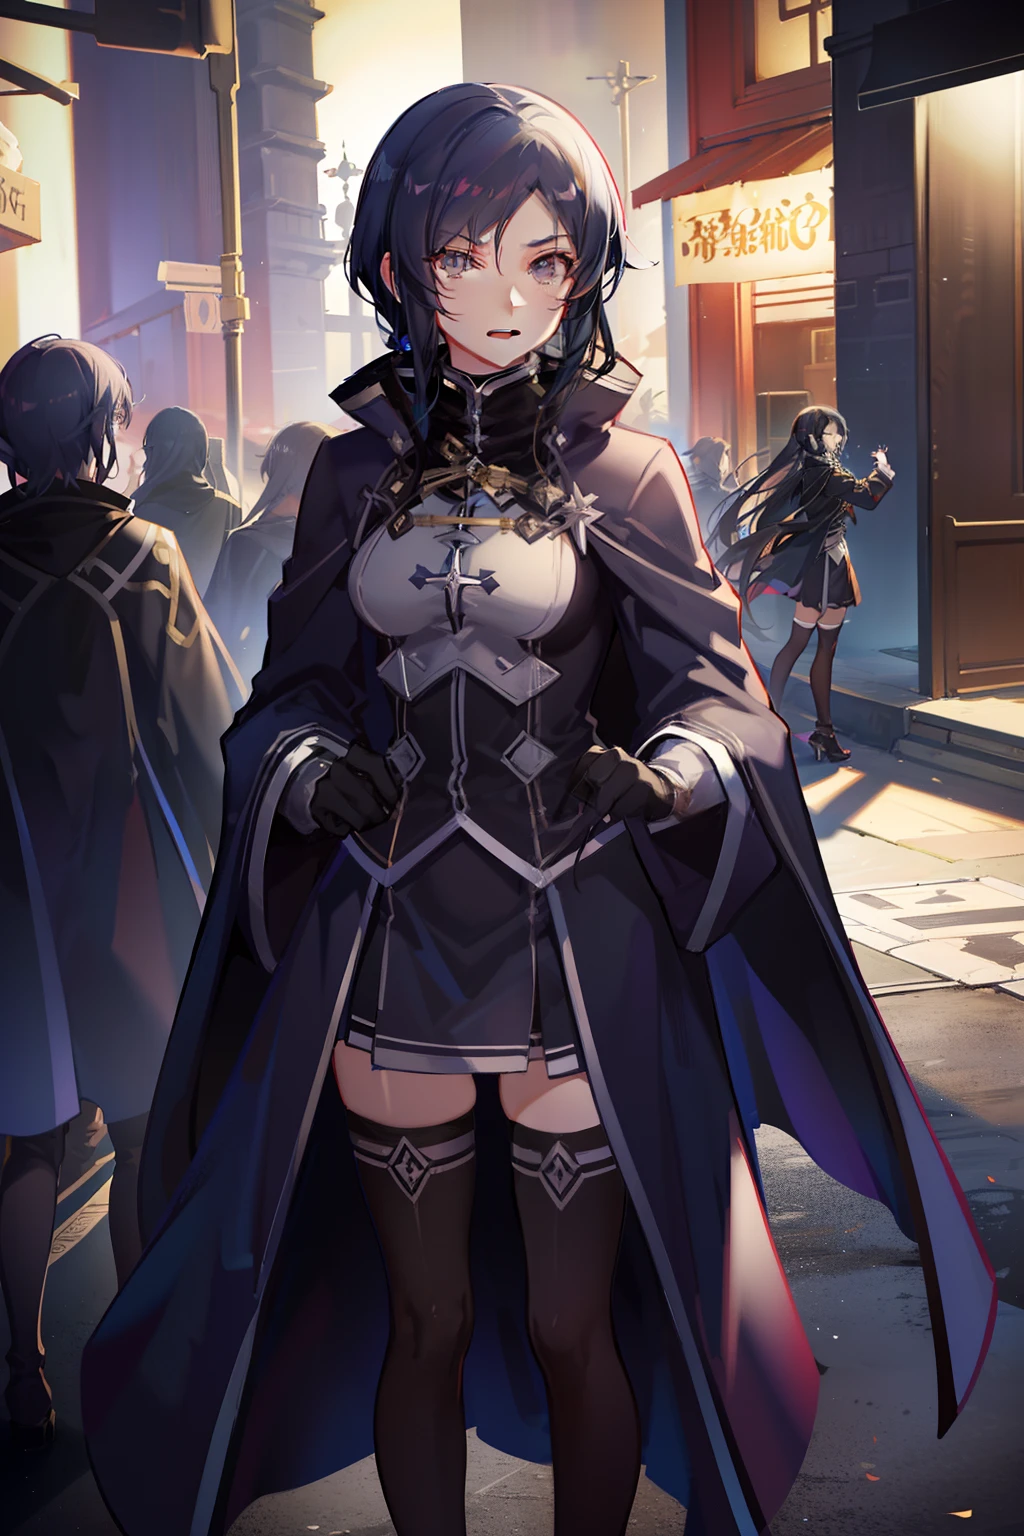 anime of a girl in a coat and cape, nanahoshi from mushoku tensei, nanahoshi, girl, inspired by nanahoshi mushoku tensei, happy, black hair, black eyes, dark eyes, cinematic art, beautiful woman, medium breasts, breasts, bountiful , beautiful art, wearing a suit, wearing a dark blue suit, dark blue tuxedo, in a city, wearing a dark suit, clothes is a suit, posh fancy wear, suit and tie, formal clothes different clothes, suit!, suit!!!, tie!, tie!!.